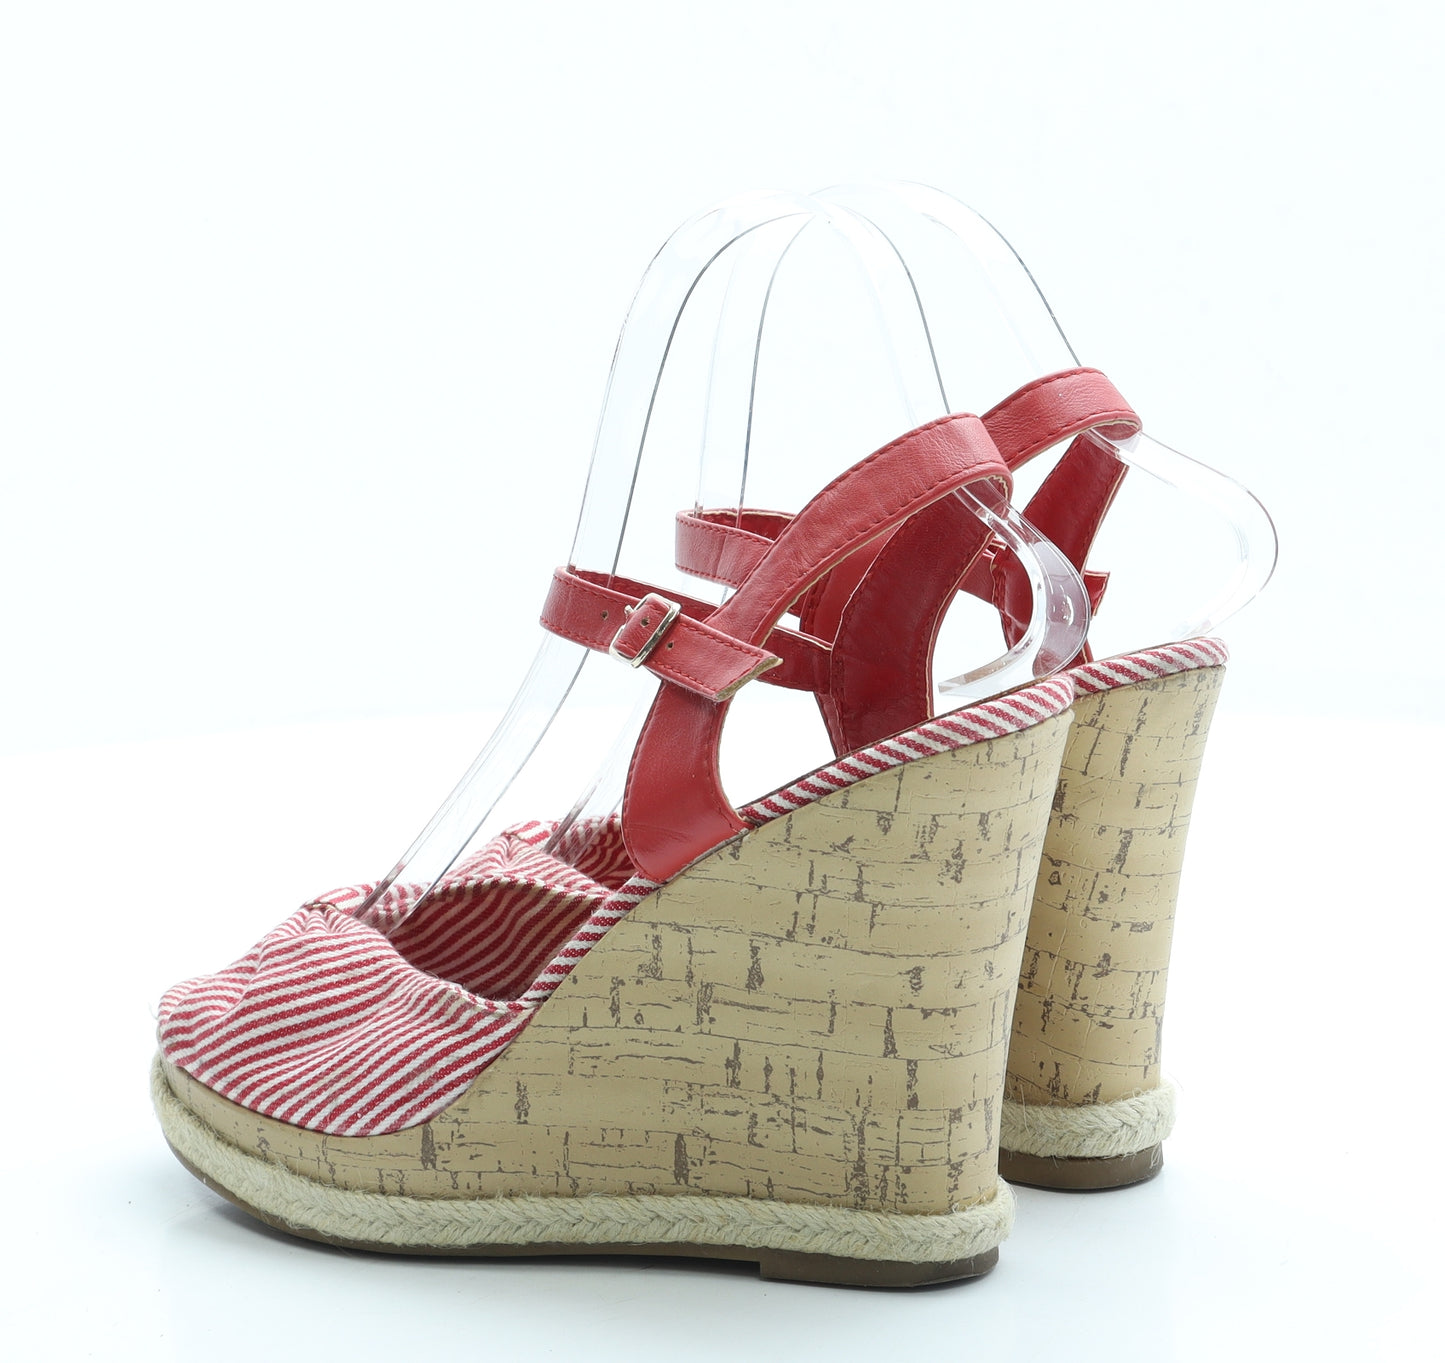 Fiore Womens Red Striped Polyester Espadrille Heel UK 5 38